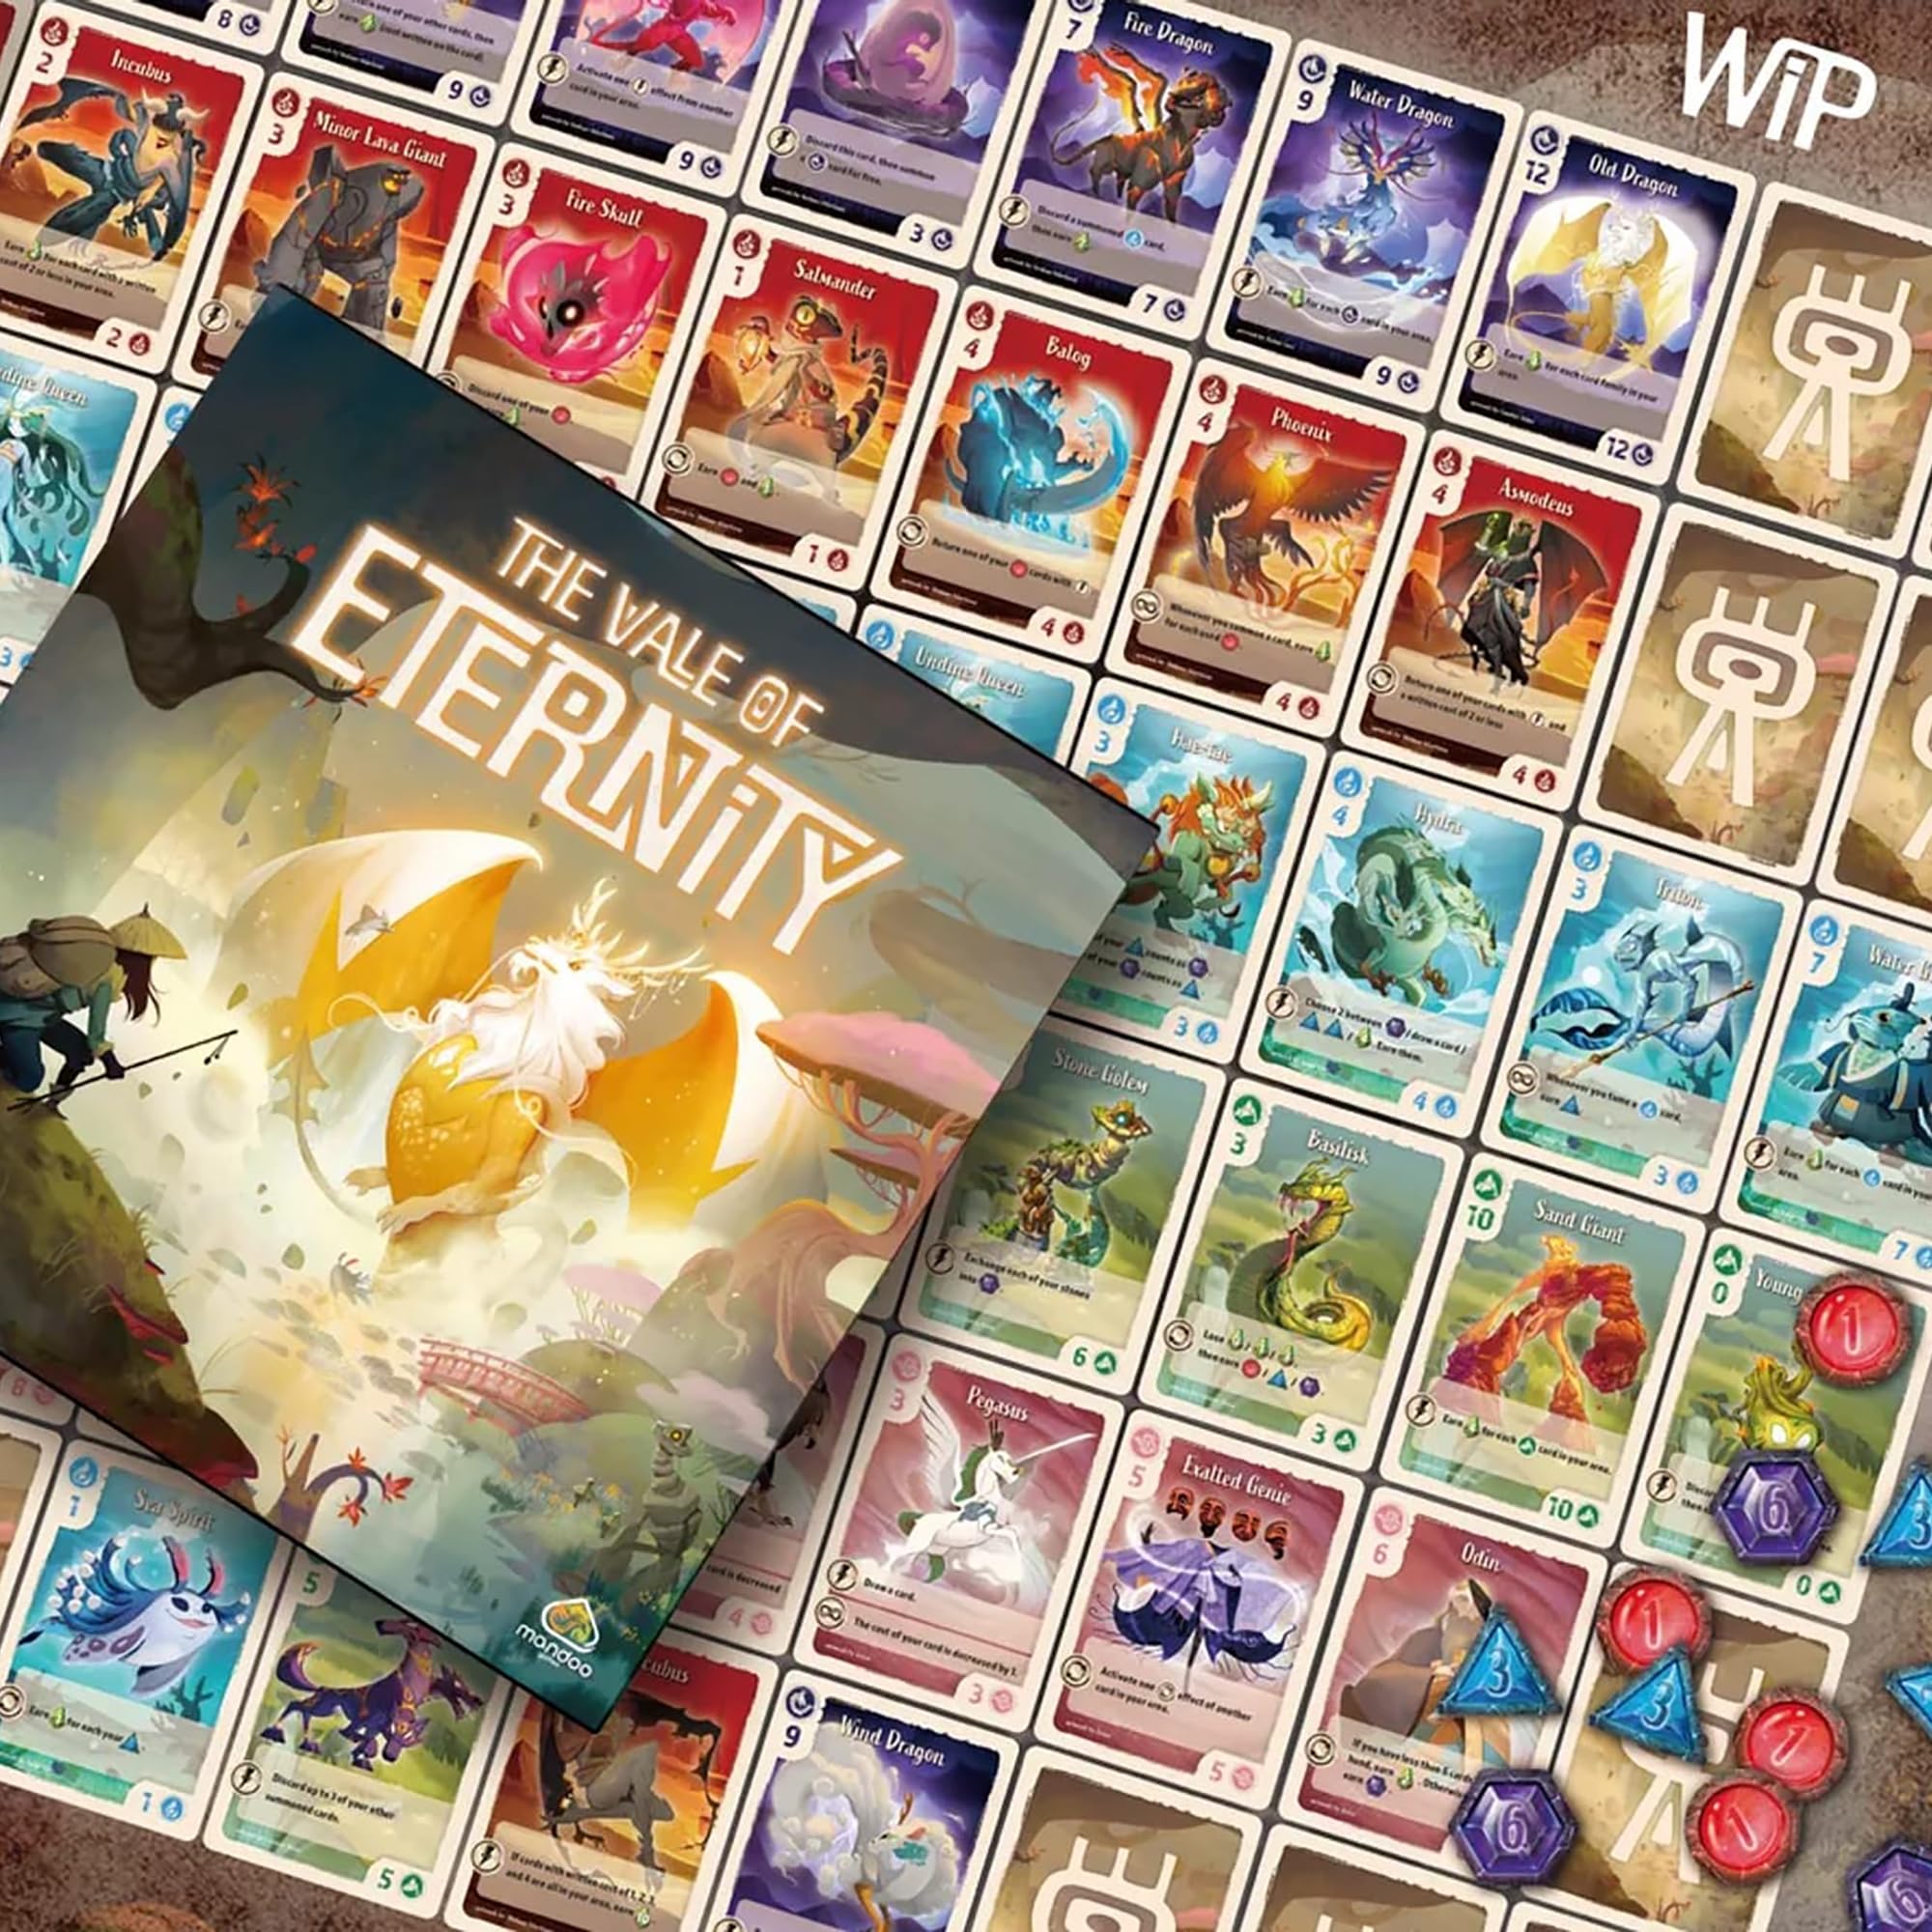 Renegade Game Studios: The Vale of Eternity - Drafting & Set Collection Card Game, Tame & Hunt Fantastical Monsters & Creatures, Ages 14+, 2-4 Players